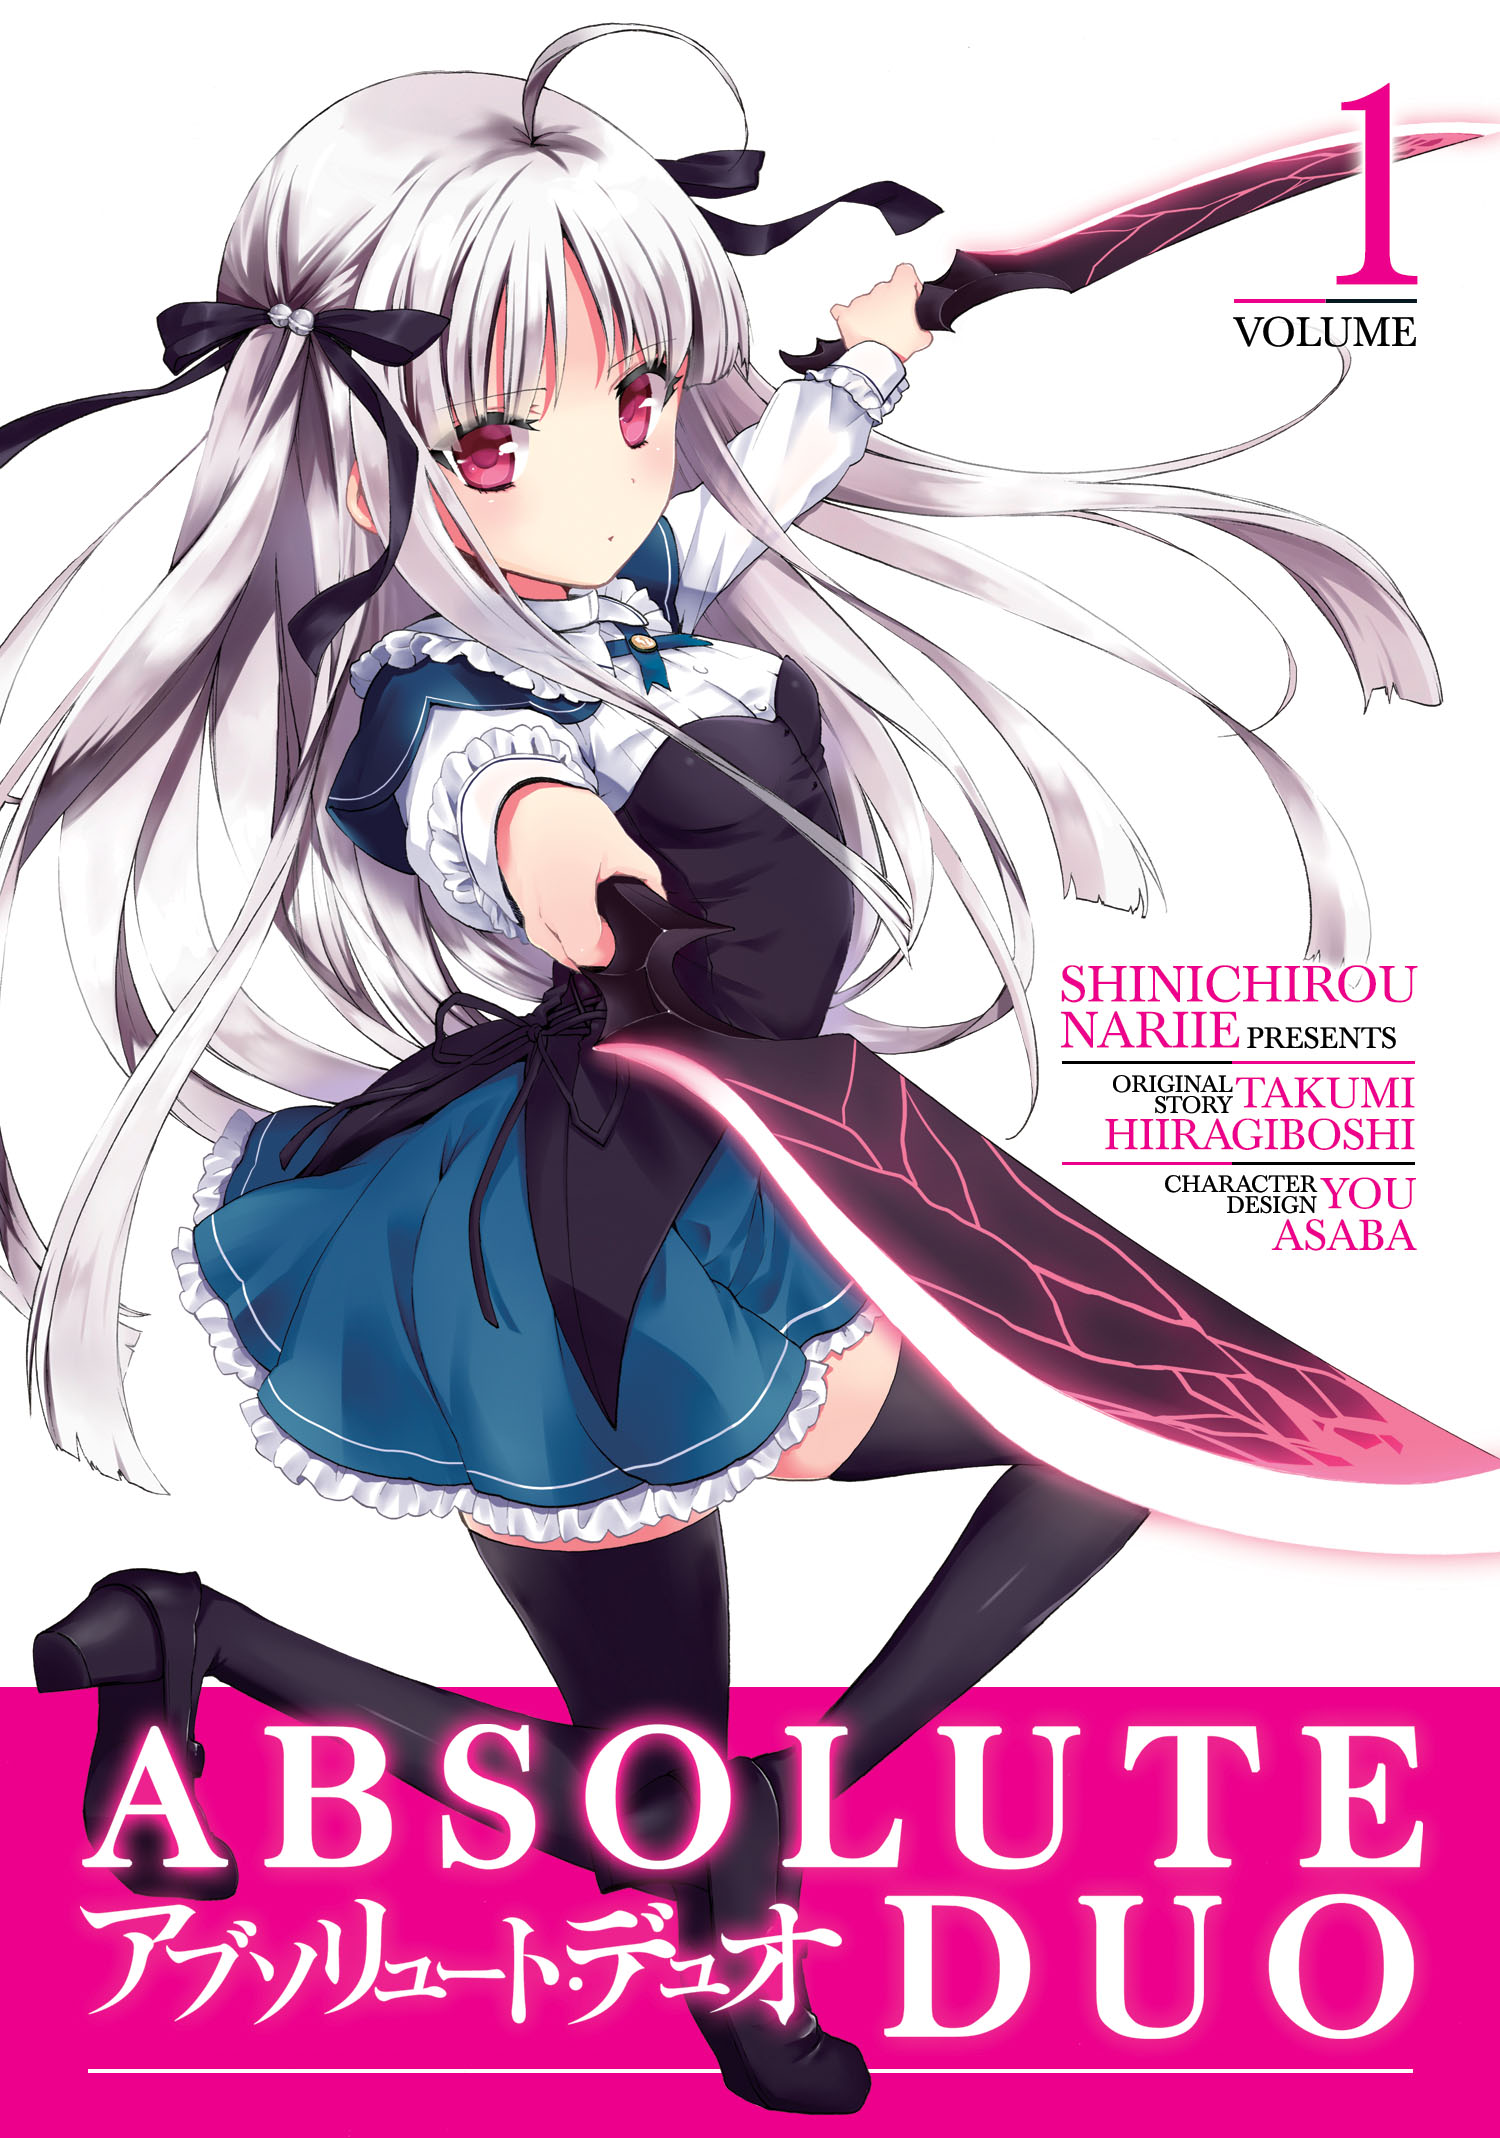 Absolute Duo/#1949909  Absolute duo, Duo, Anime images